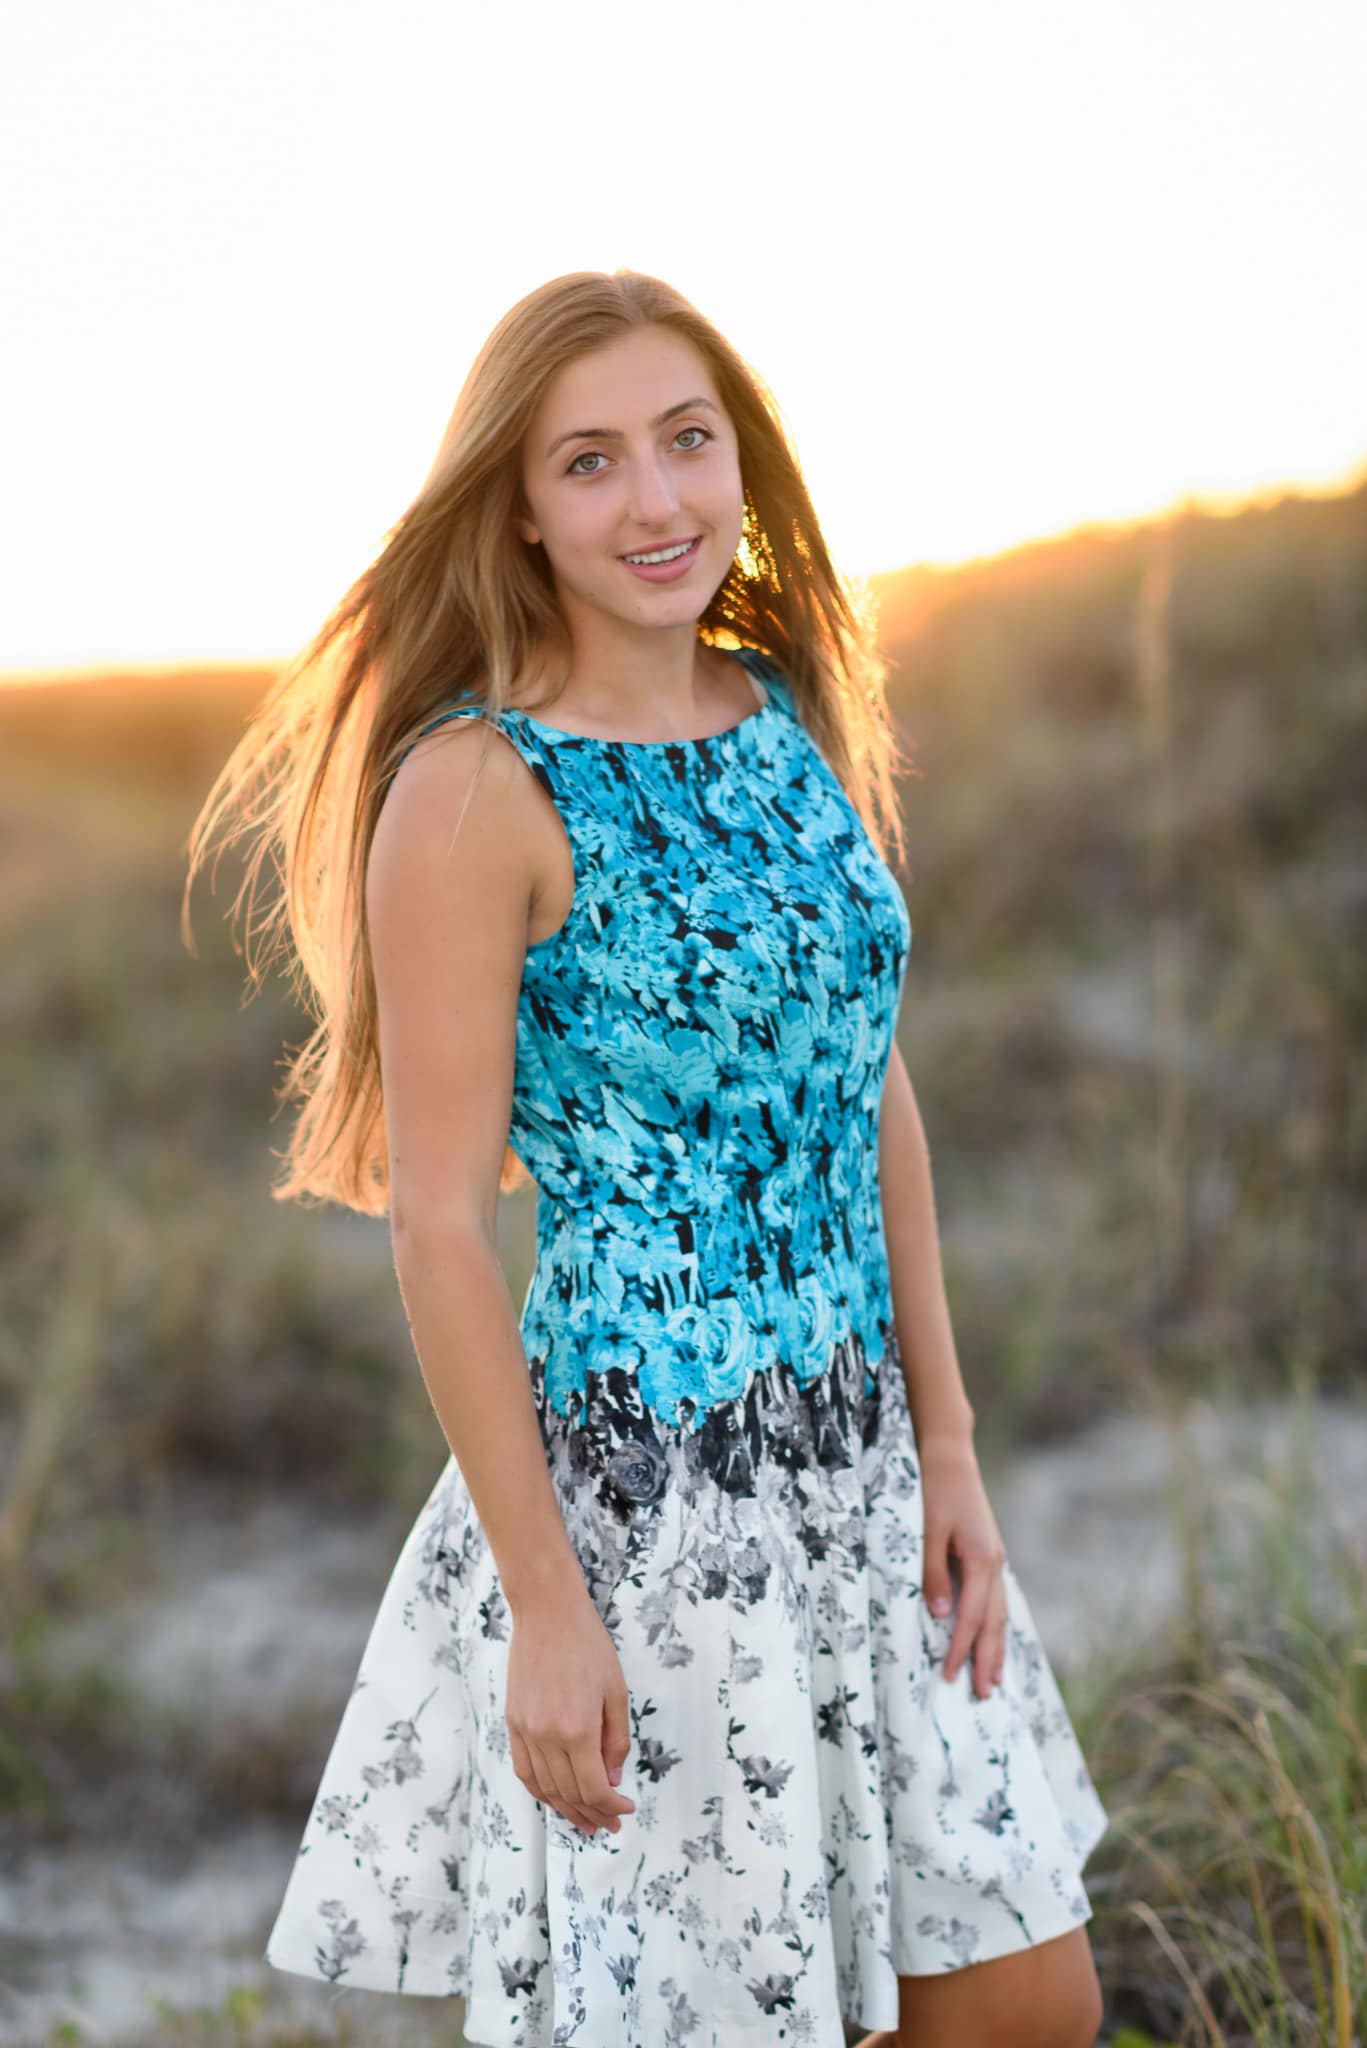 Senior portraits in the sunset by the dunes - Atalaya Castle